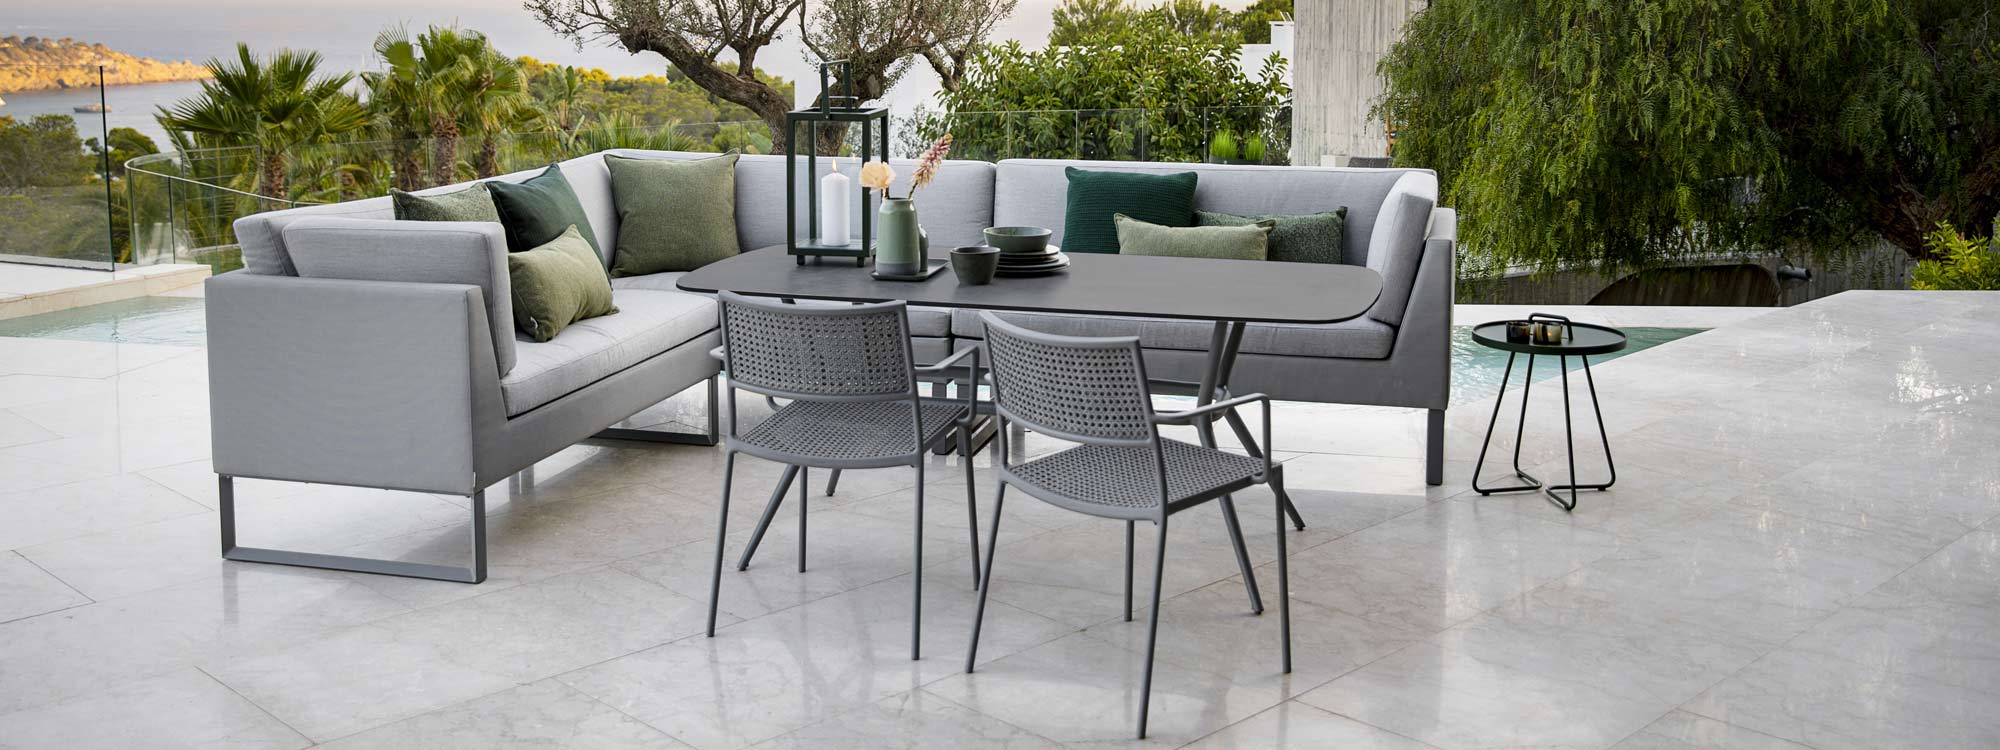 Image of Flex corner dining sofa, Joy ceramic garden table and Less outdoor dining chairs by Cane-line